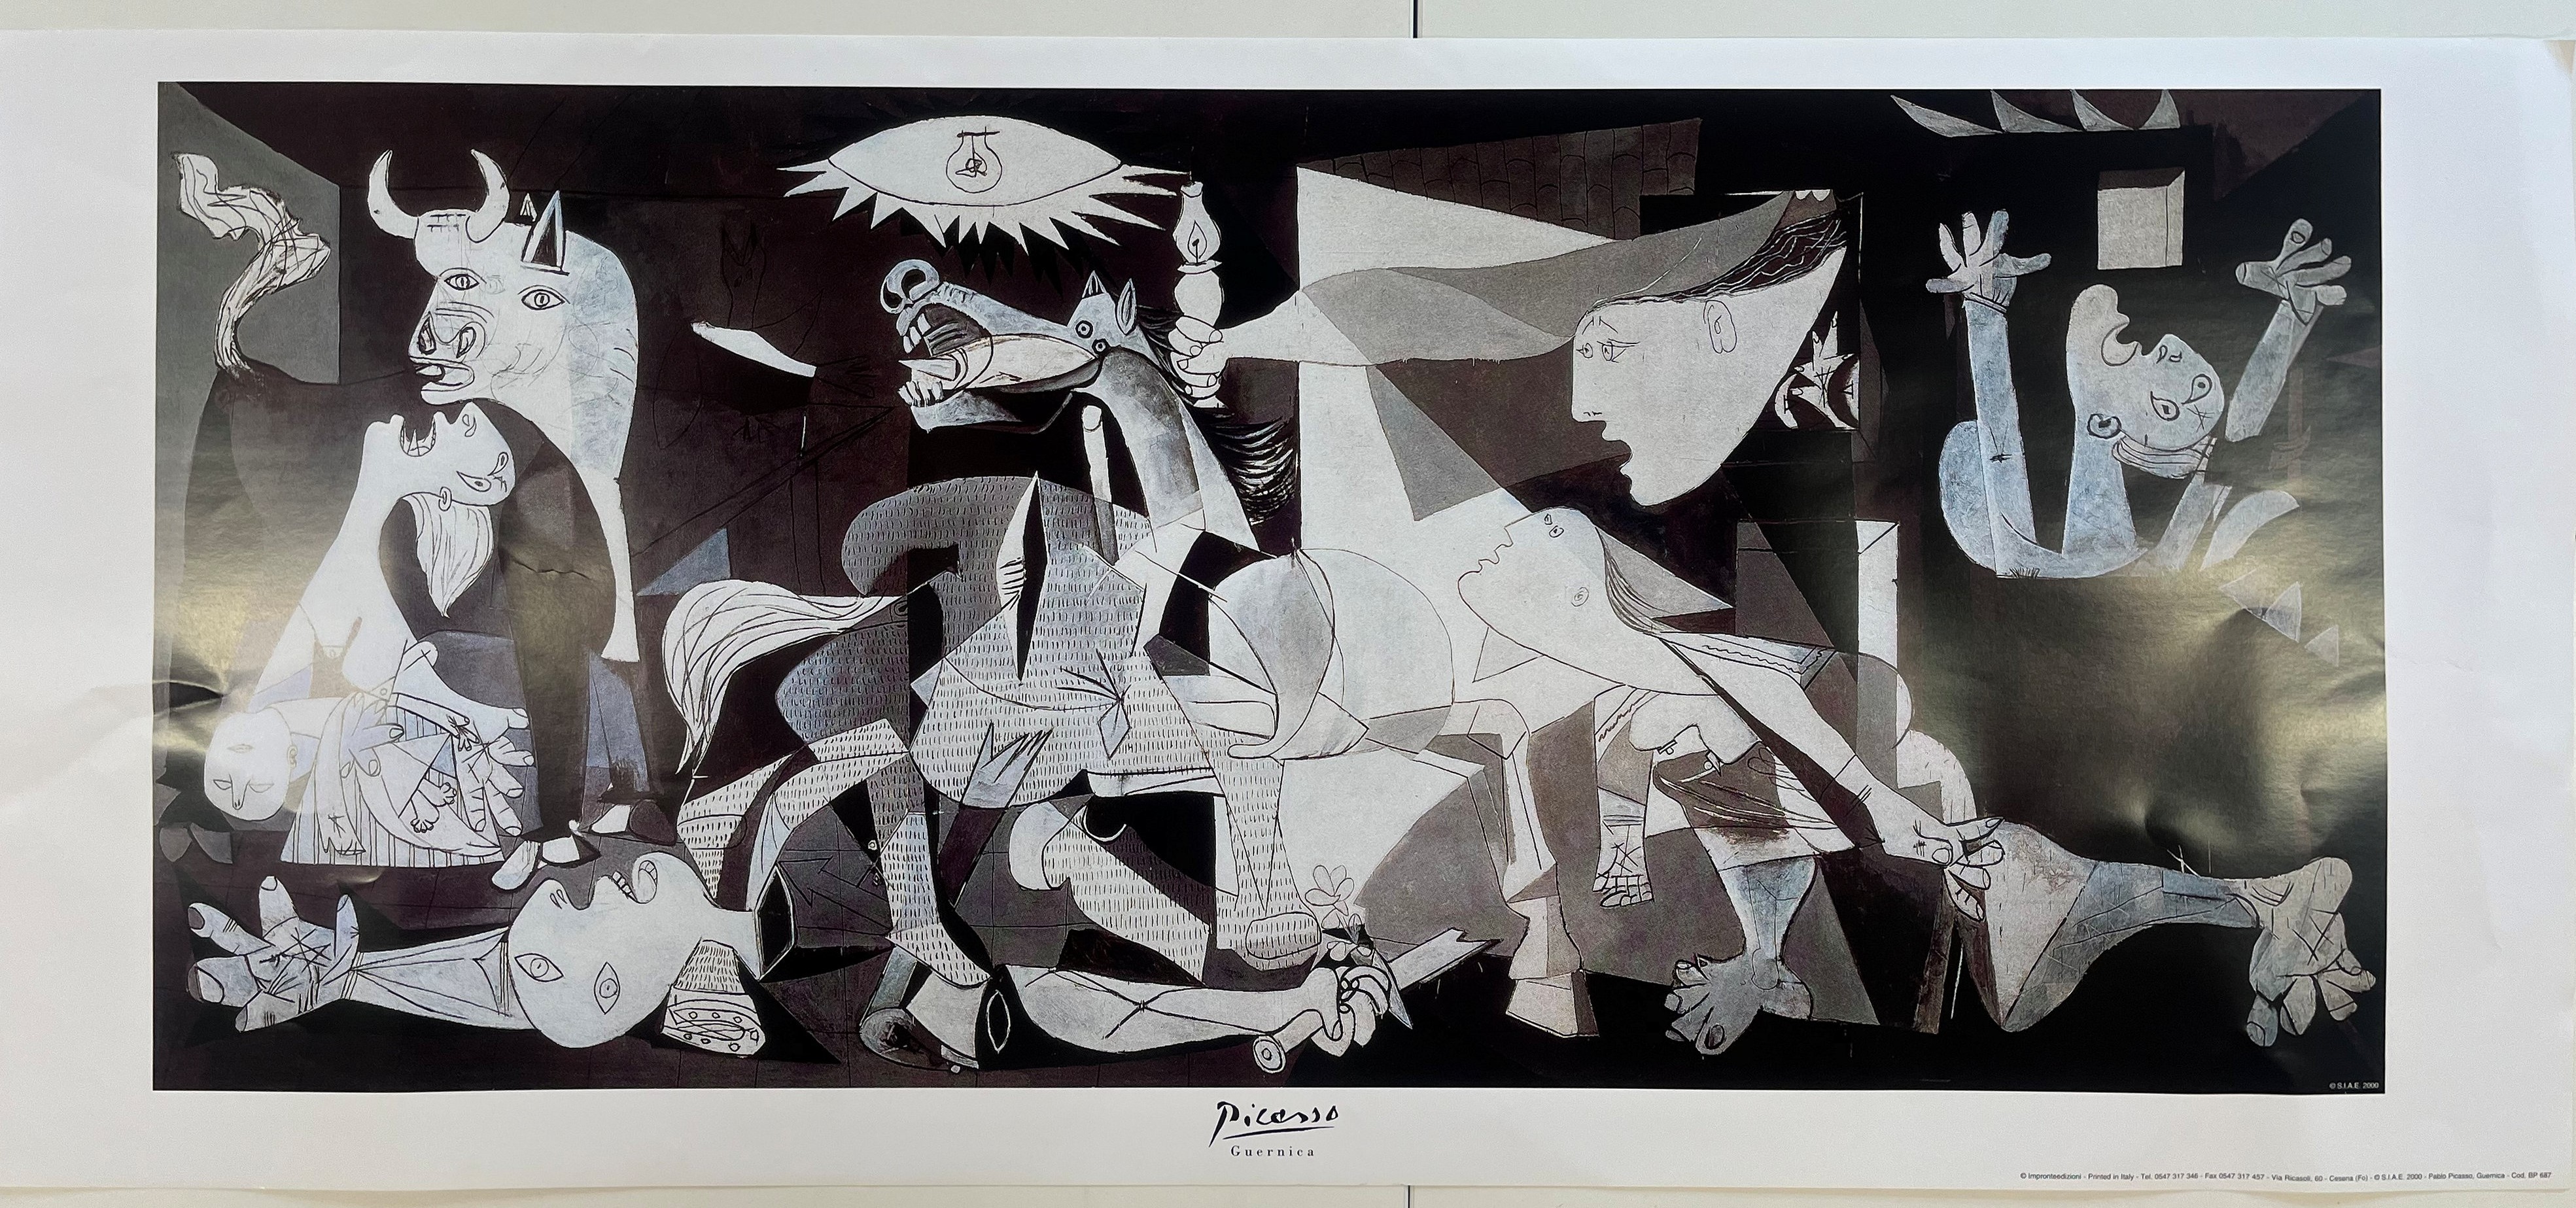 AFTER PABLO PICASSO (1881-1973) - GUERNICA - GALLERY POSTER - Image 2 of 5